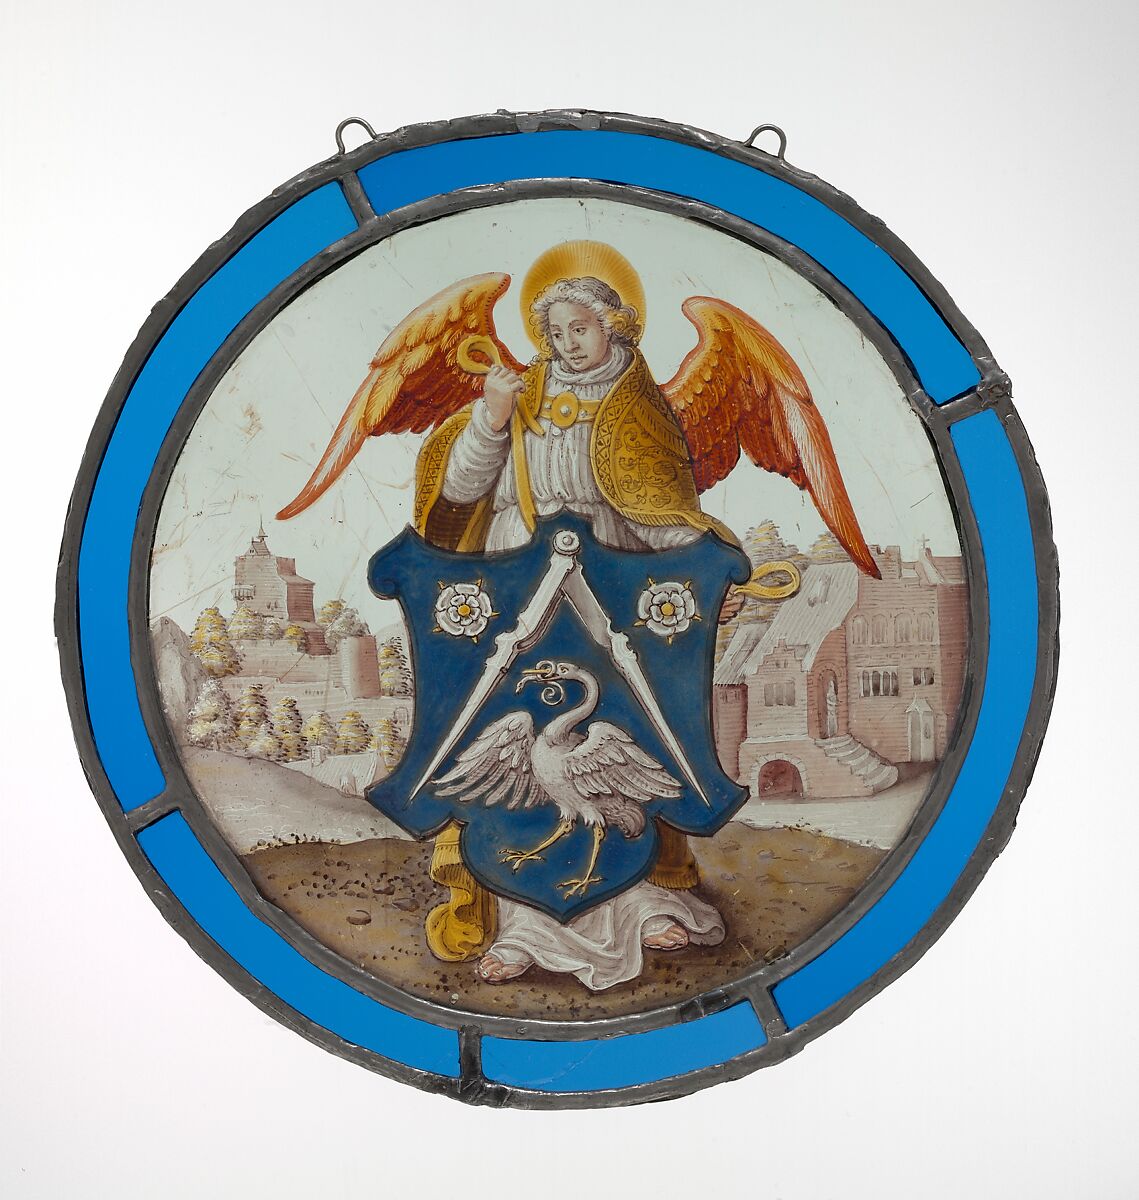 Angel Supporting a Heraldic Shield, Glass, vitreous paint, sanguine, enamel, and silver stain, South Netherlandish 